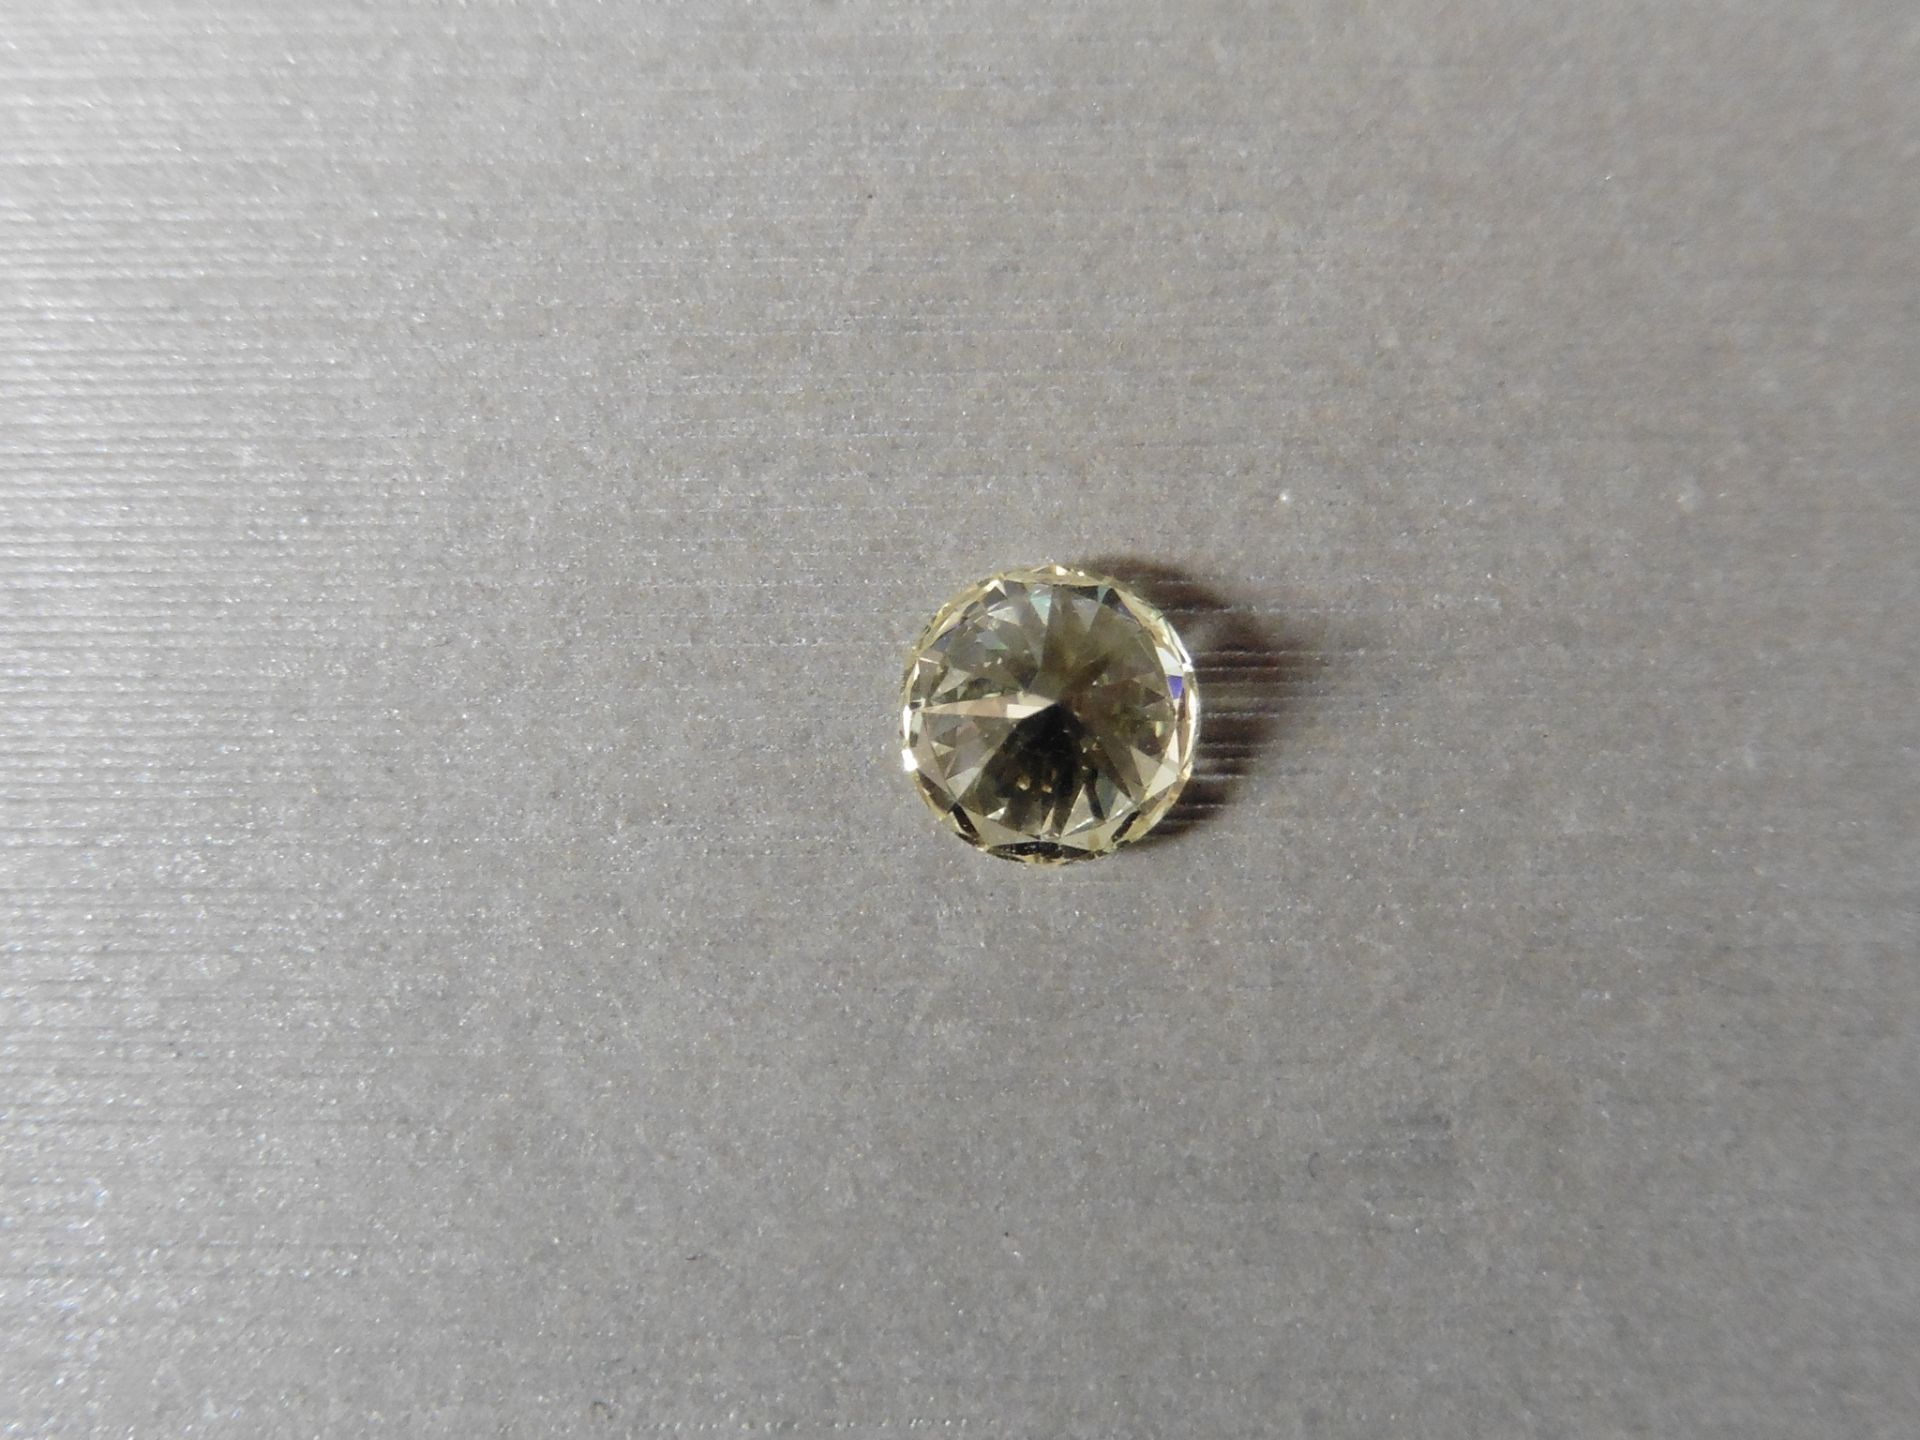 1.08ct loose brilliant cut diamond measuring 6.74 x 3.9mm. K Colour and VS1 clarity. Valued at £ - Image 3 of 6